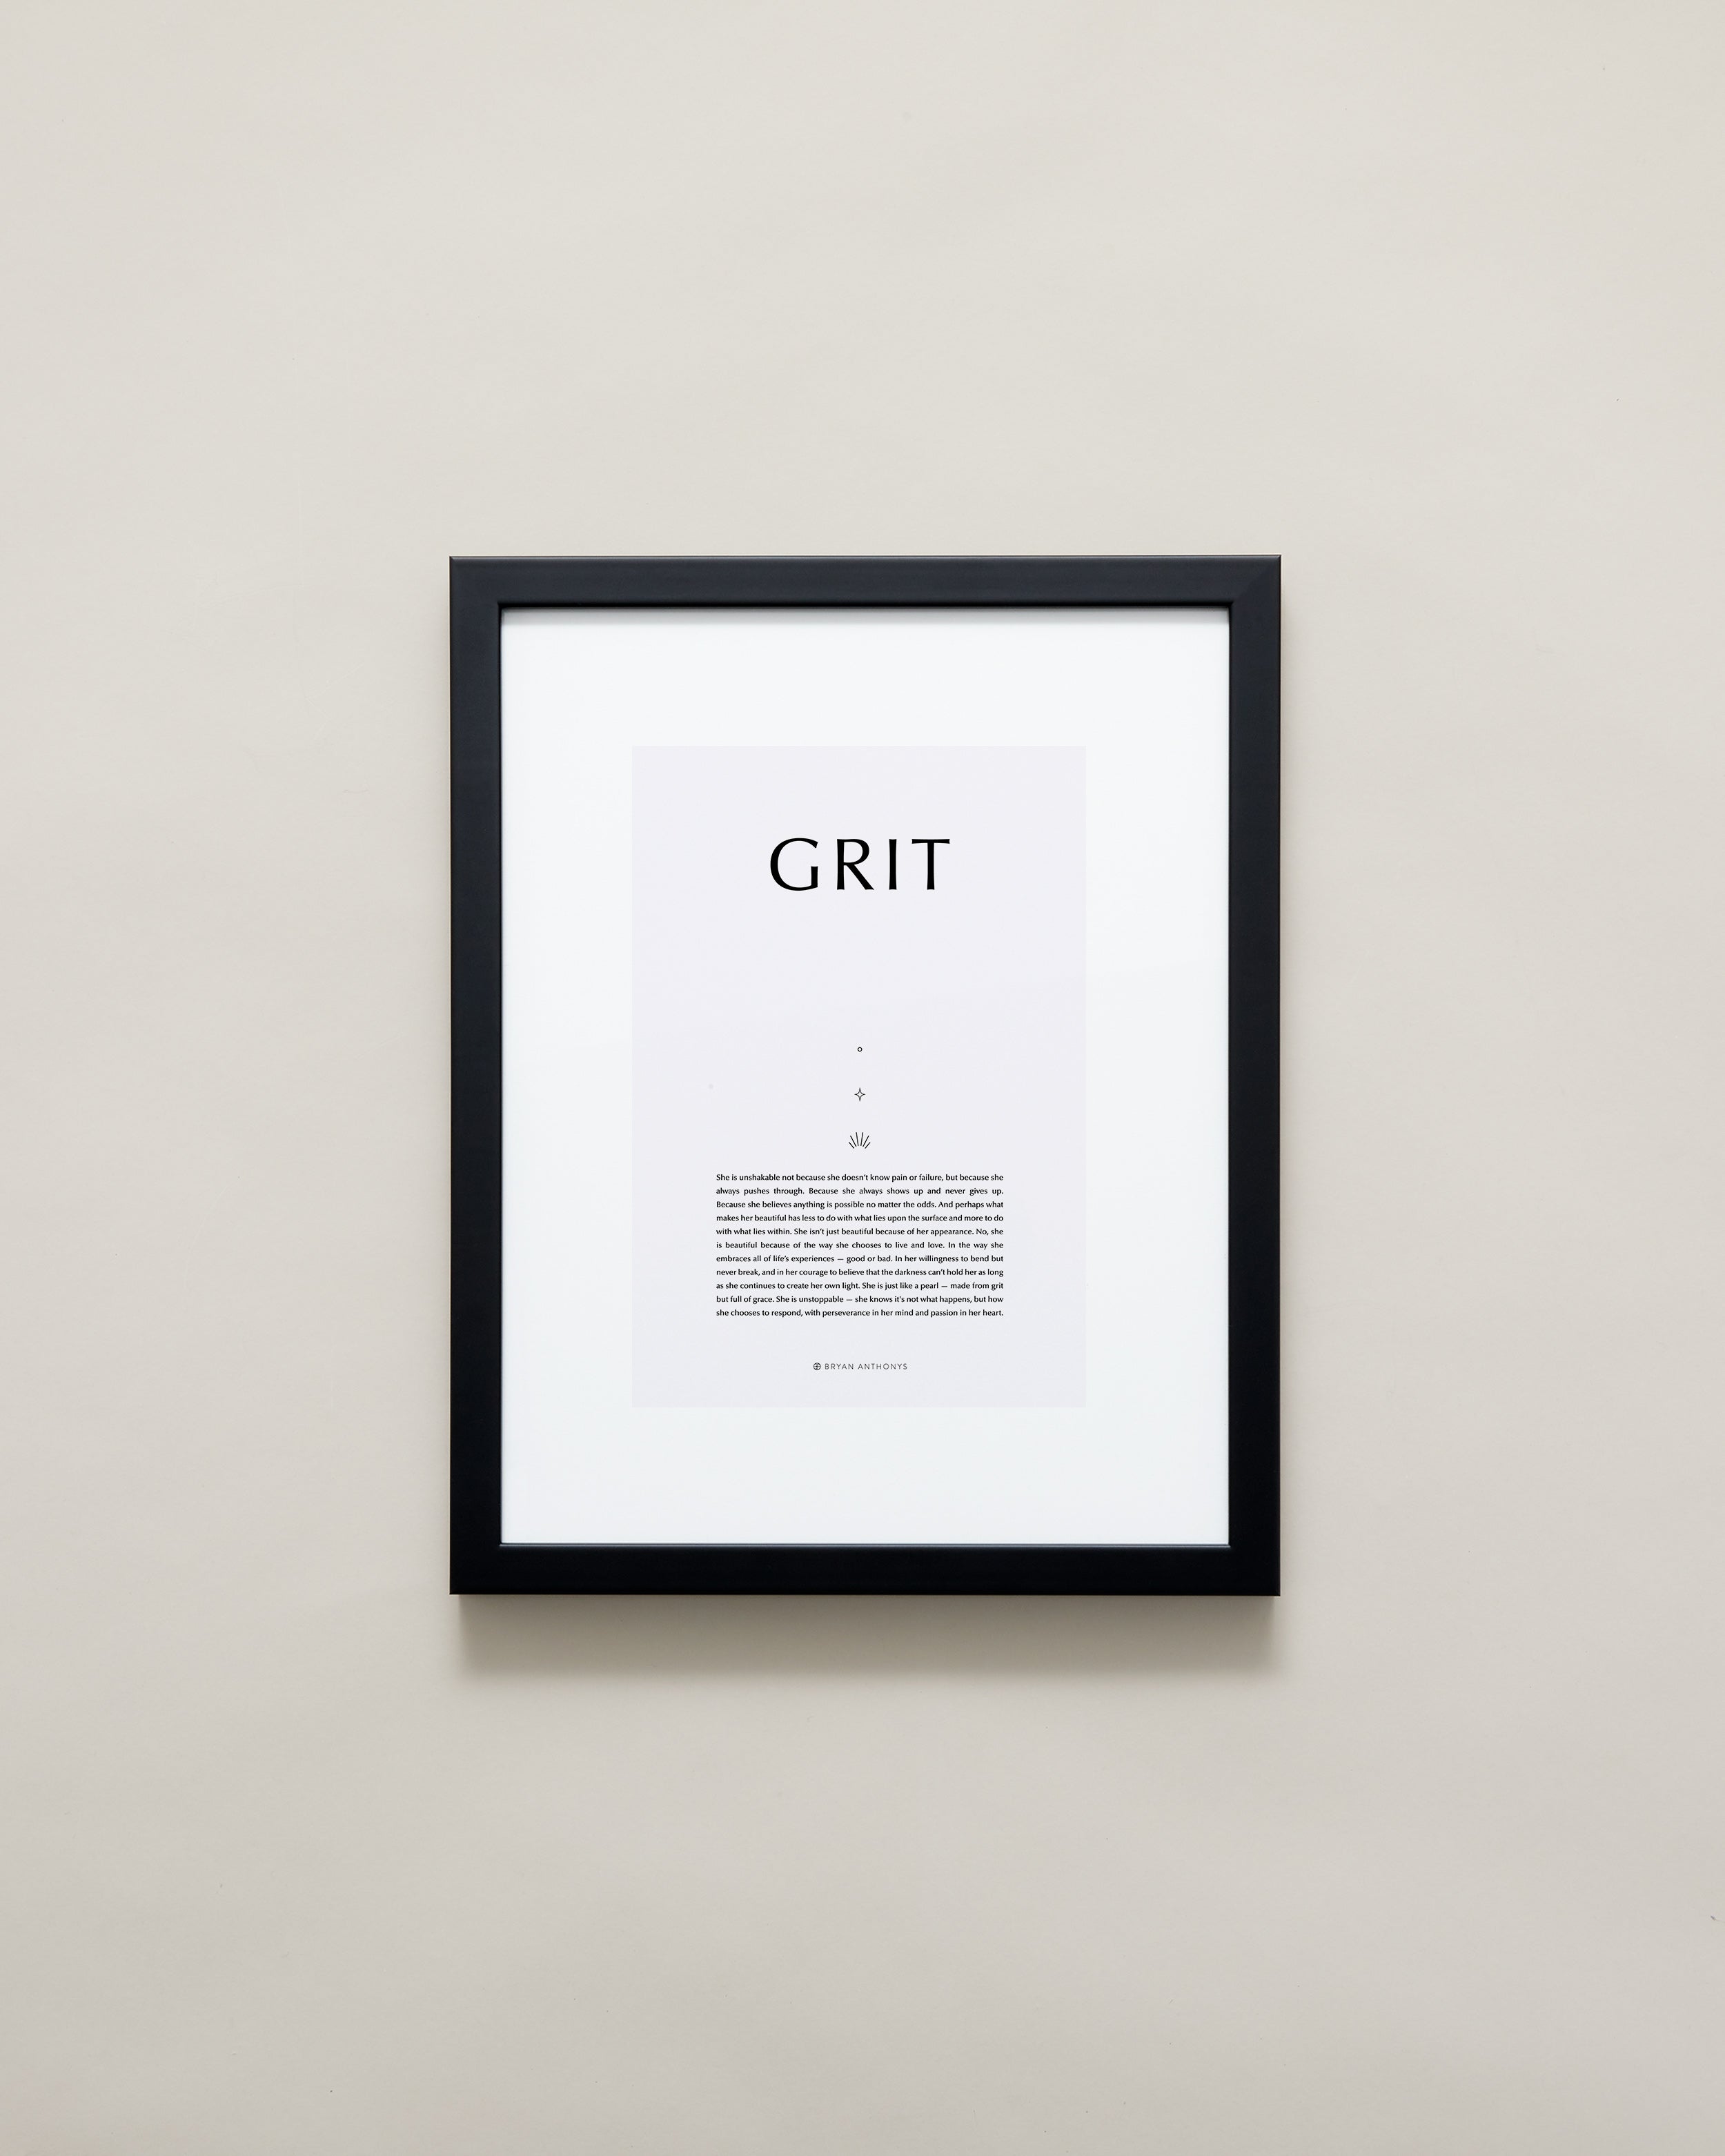 Bryan Anthonys Home Decor Grit Iconic Framed Print 11x14 Black with Gray